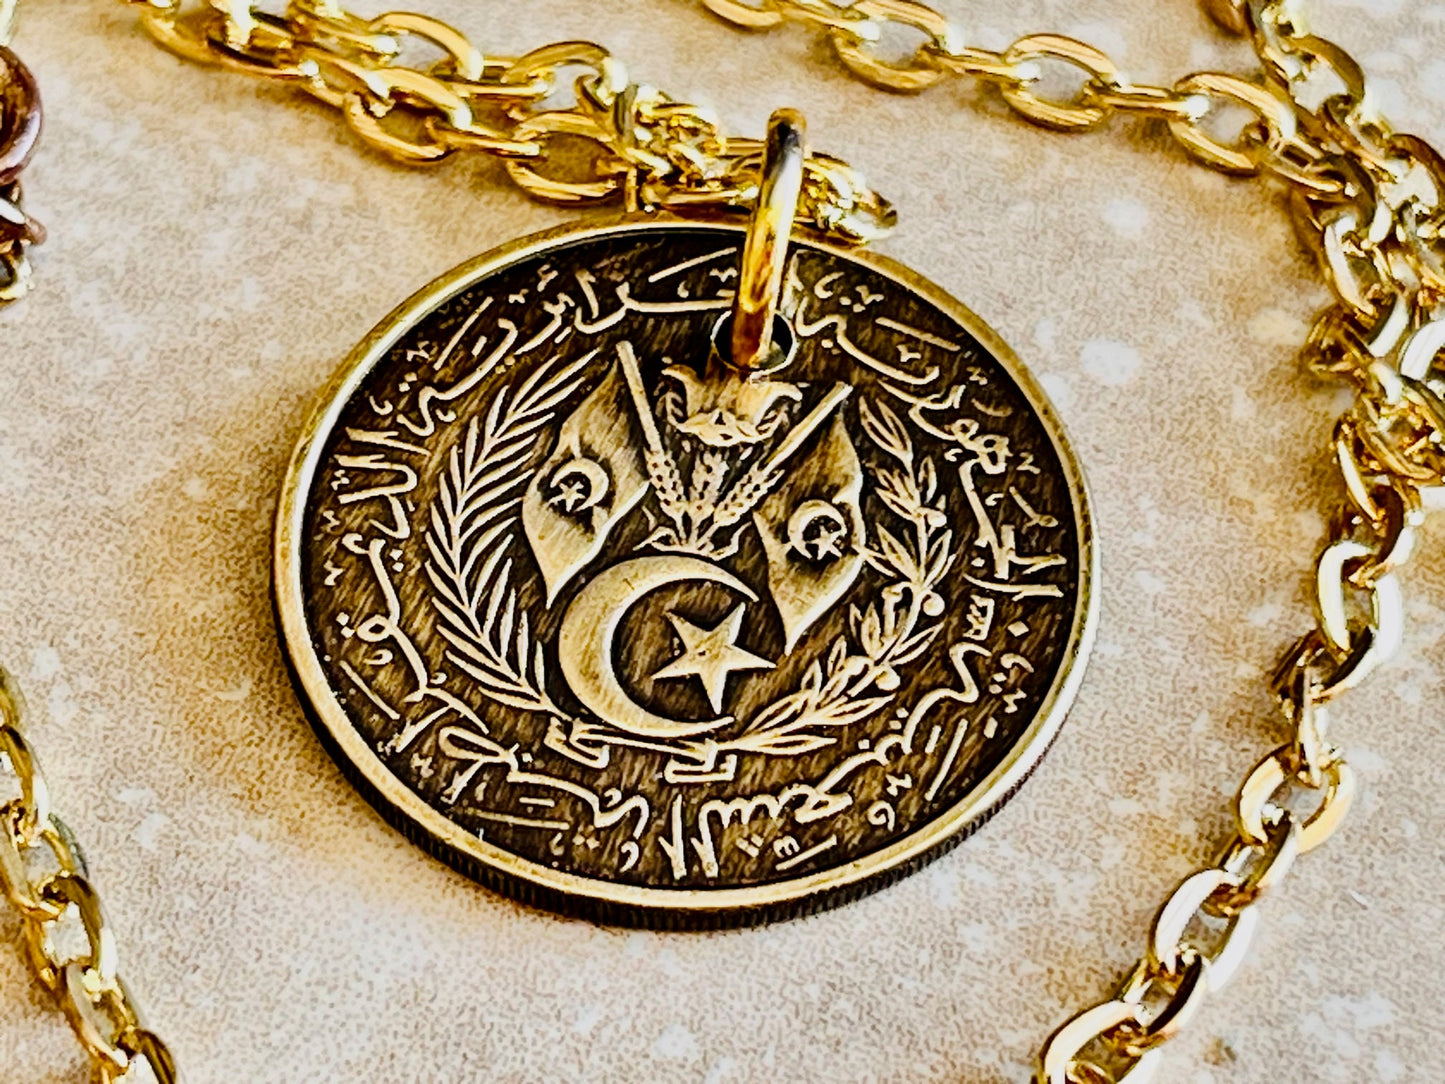 Algeria 50 Centimes Coin Pendant Algerian Personal Necklace Old Vintage Handmade Jewelry Gift Friend Charm For Him Her World Coin Collector